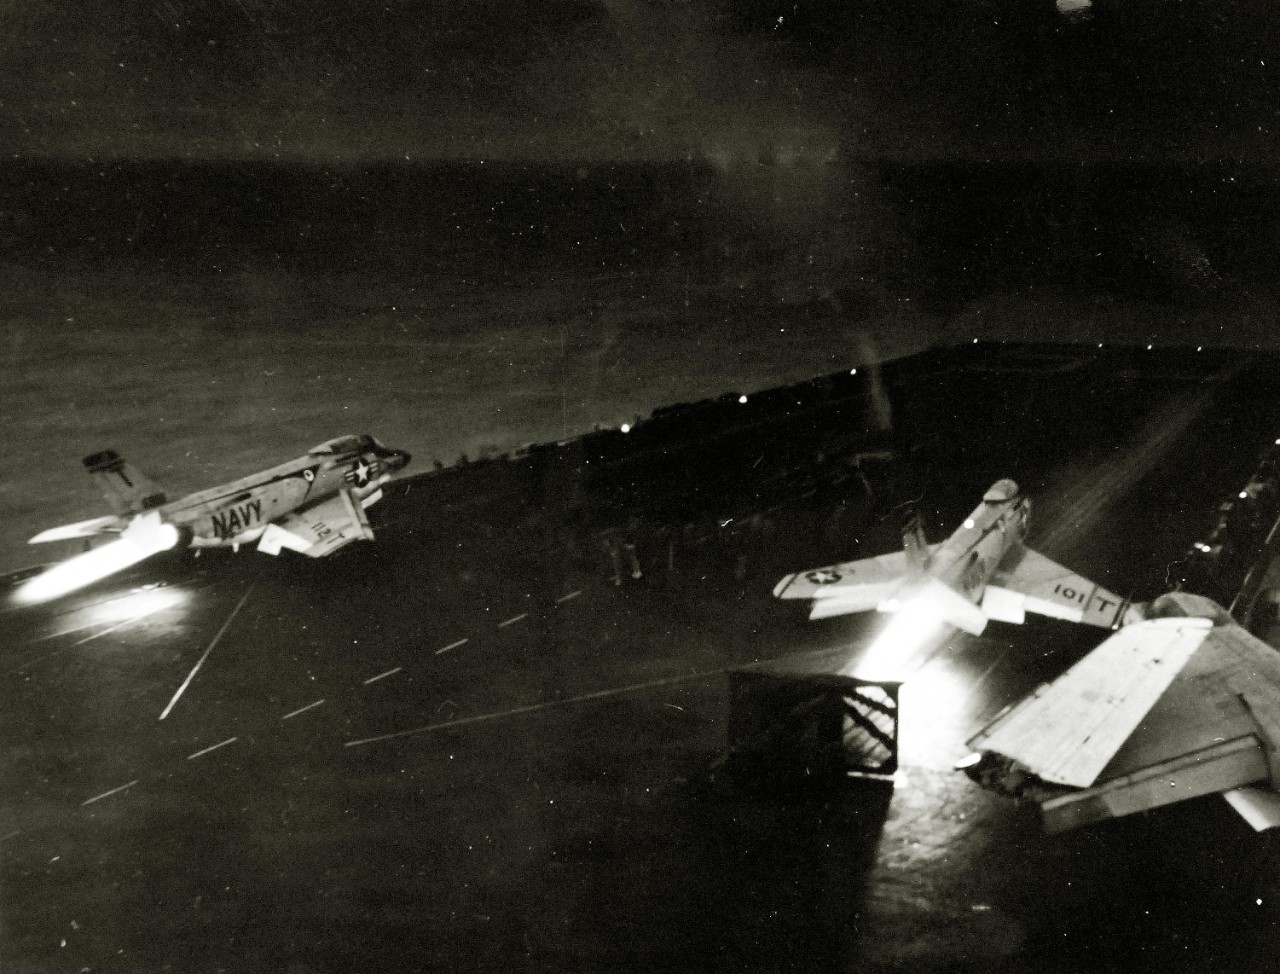 330-PS-8499 (USN 1017244):     USS Forrestal (CVA-59), 1957.     Ready for take-off, two McDonnell F3H “Demon” aircraft are catapulted from the aircraft deck of USS Forrestal (CVA-59) for night interception training mission in the Eastern Mediterranean.   Photograph released July 19, 1957.   Official U.S. Navy Photograph, now in the collections of the National Archives.   (2014/12/30). 